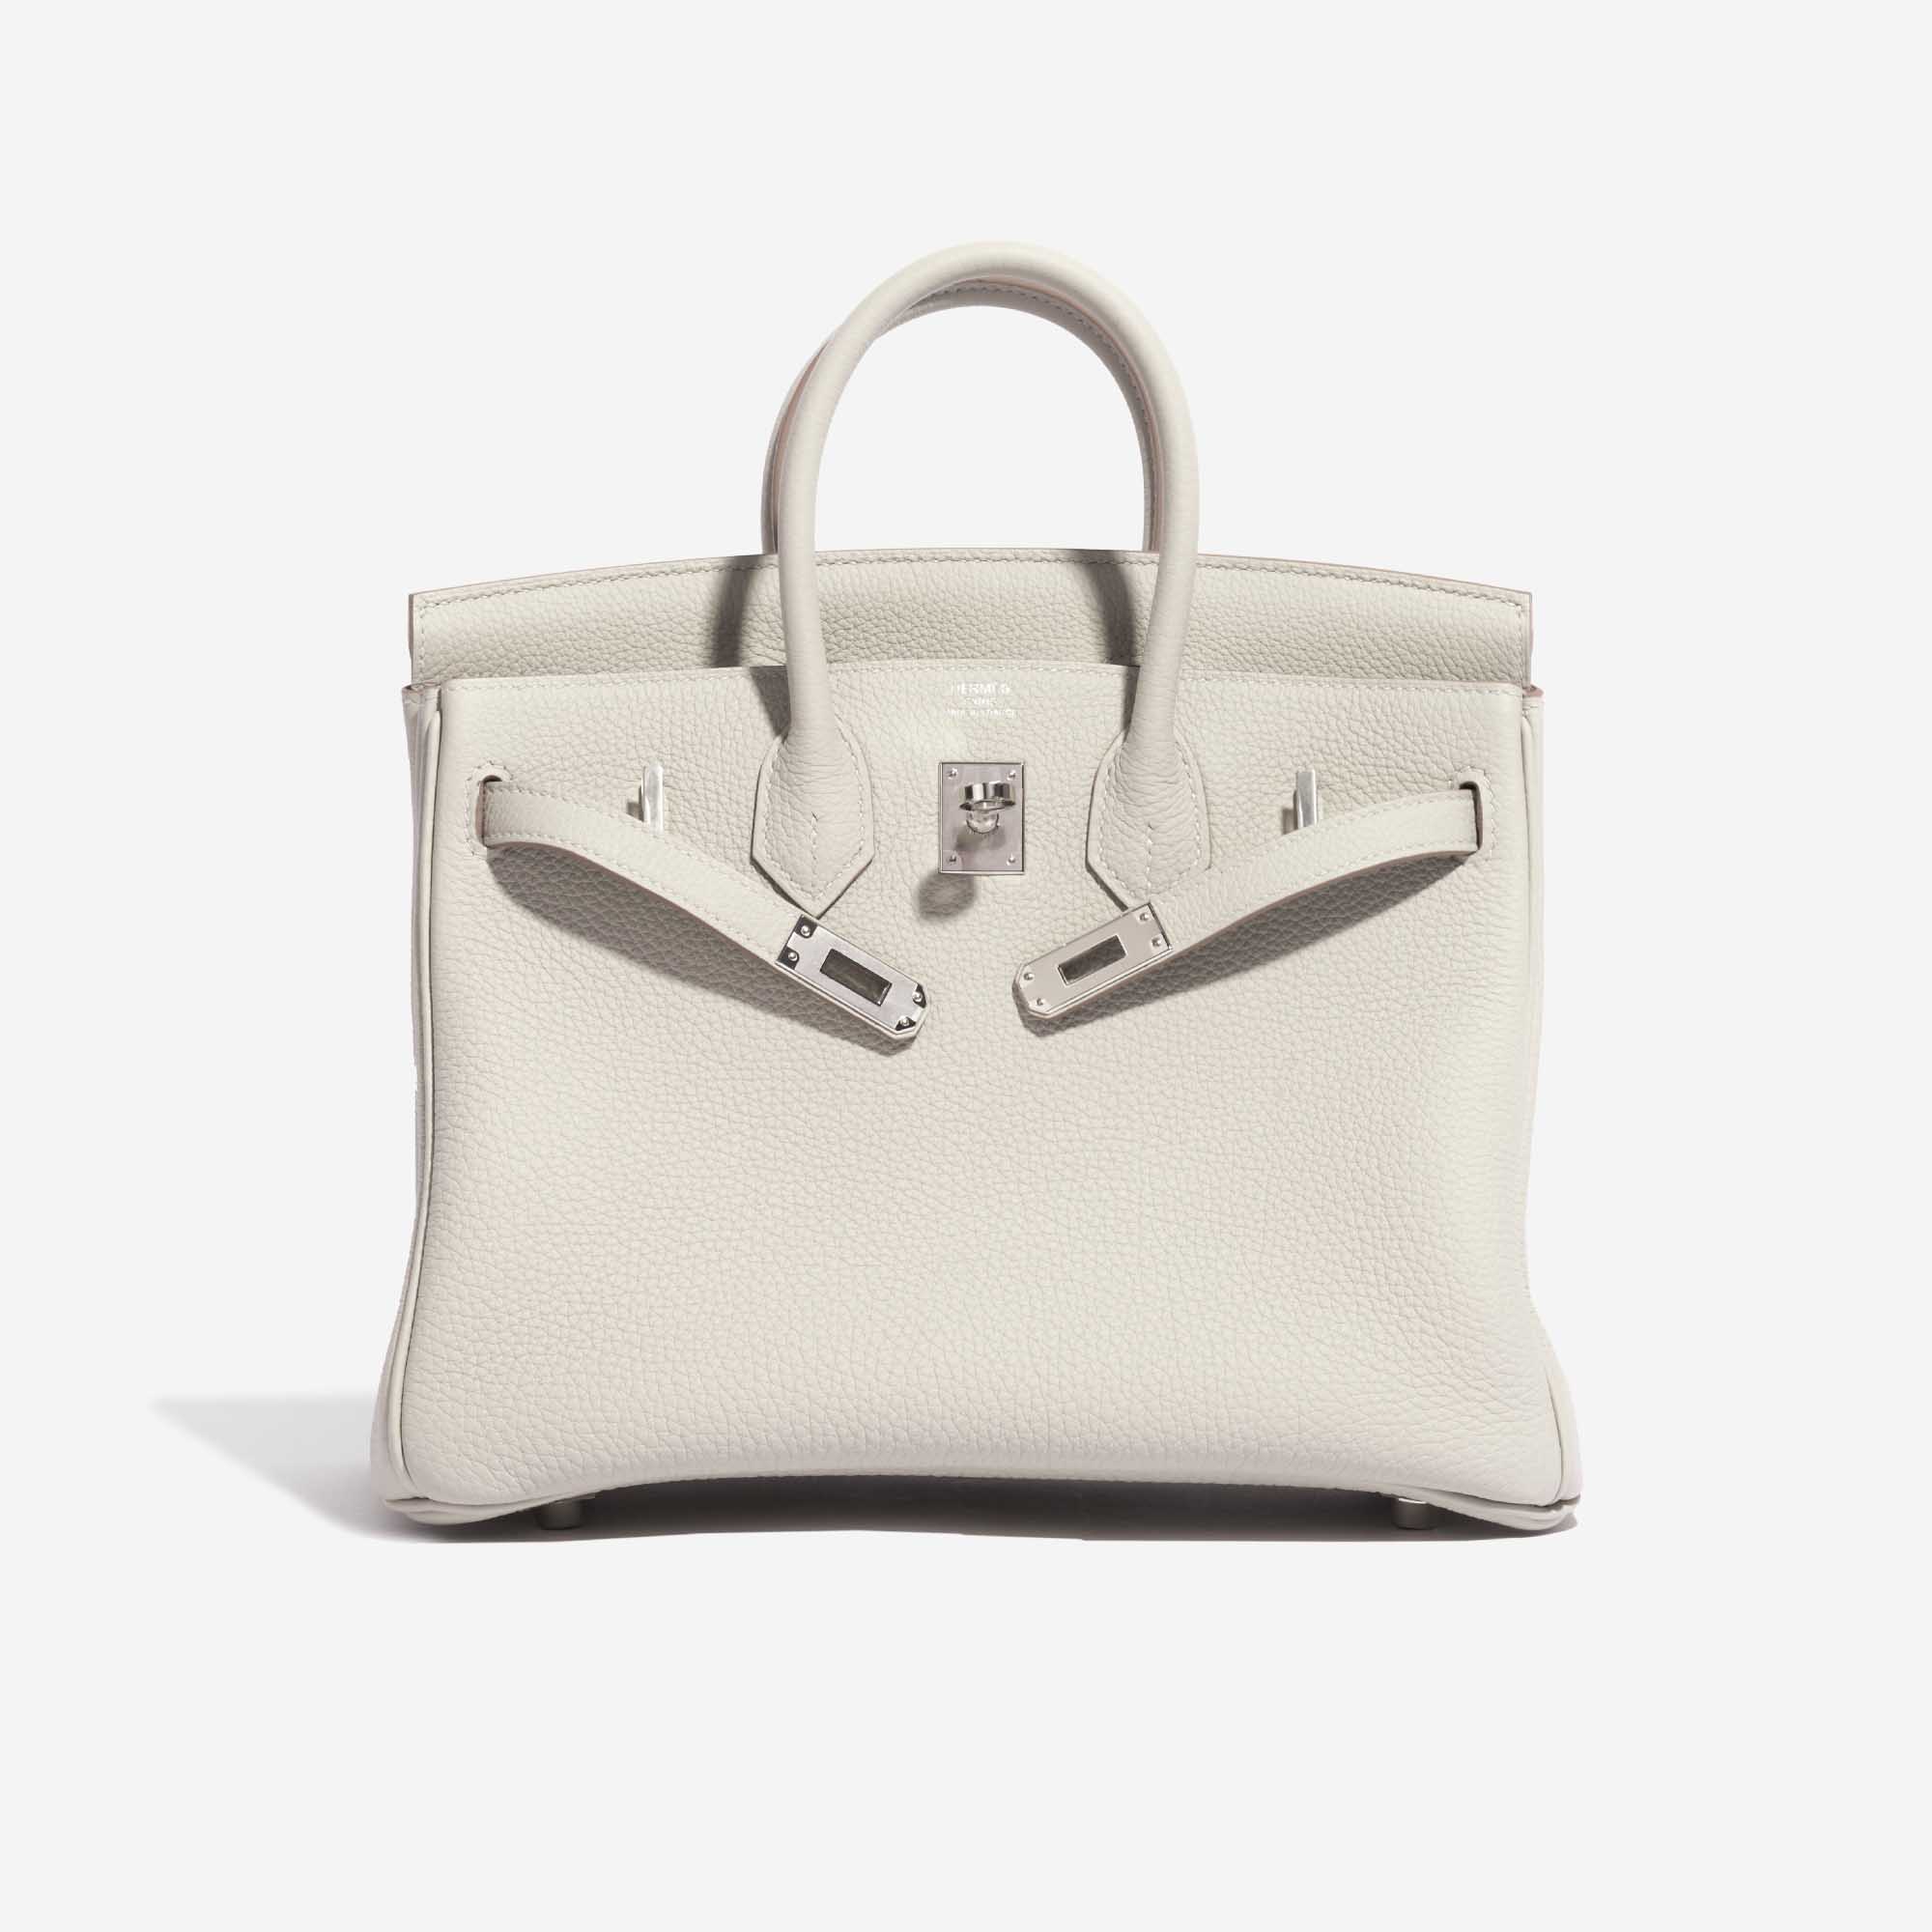 A GRIS PERLE TOGO LEATHER BIRKIN 25 WITH GOLD HARDWARE